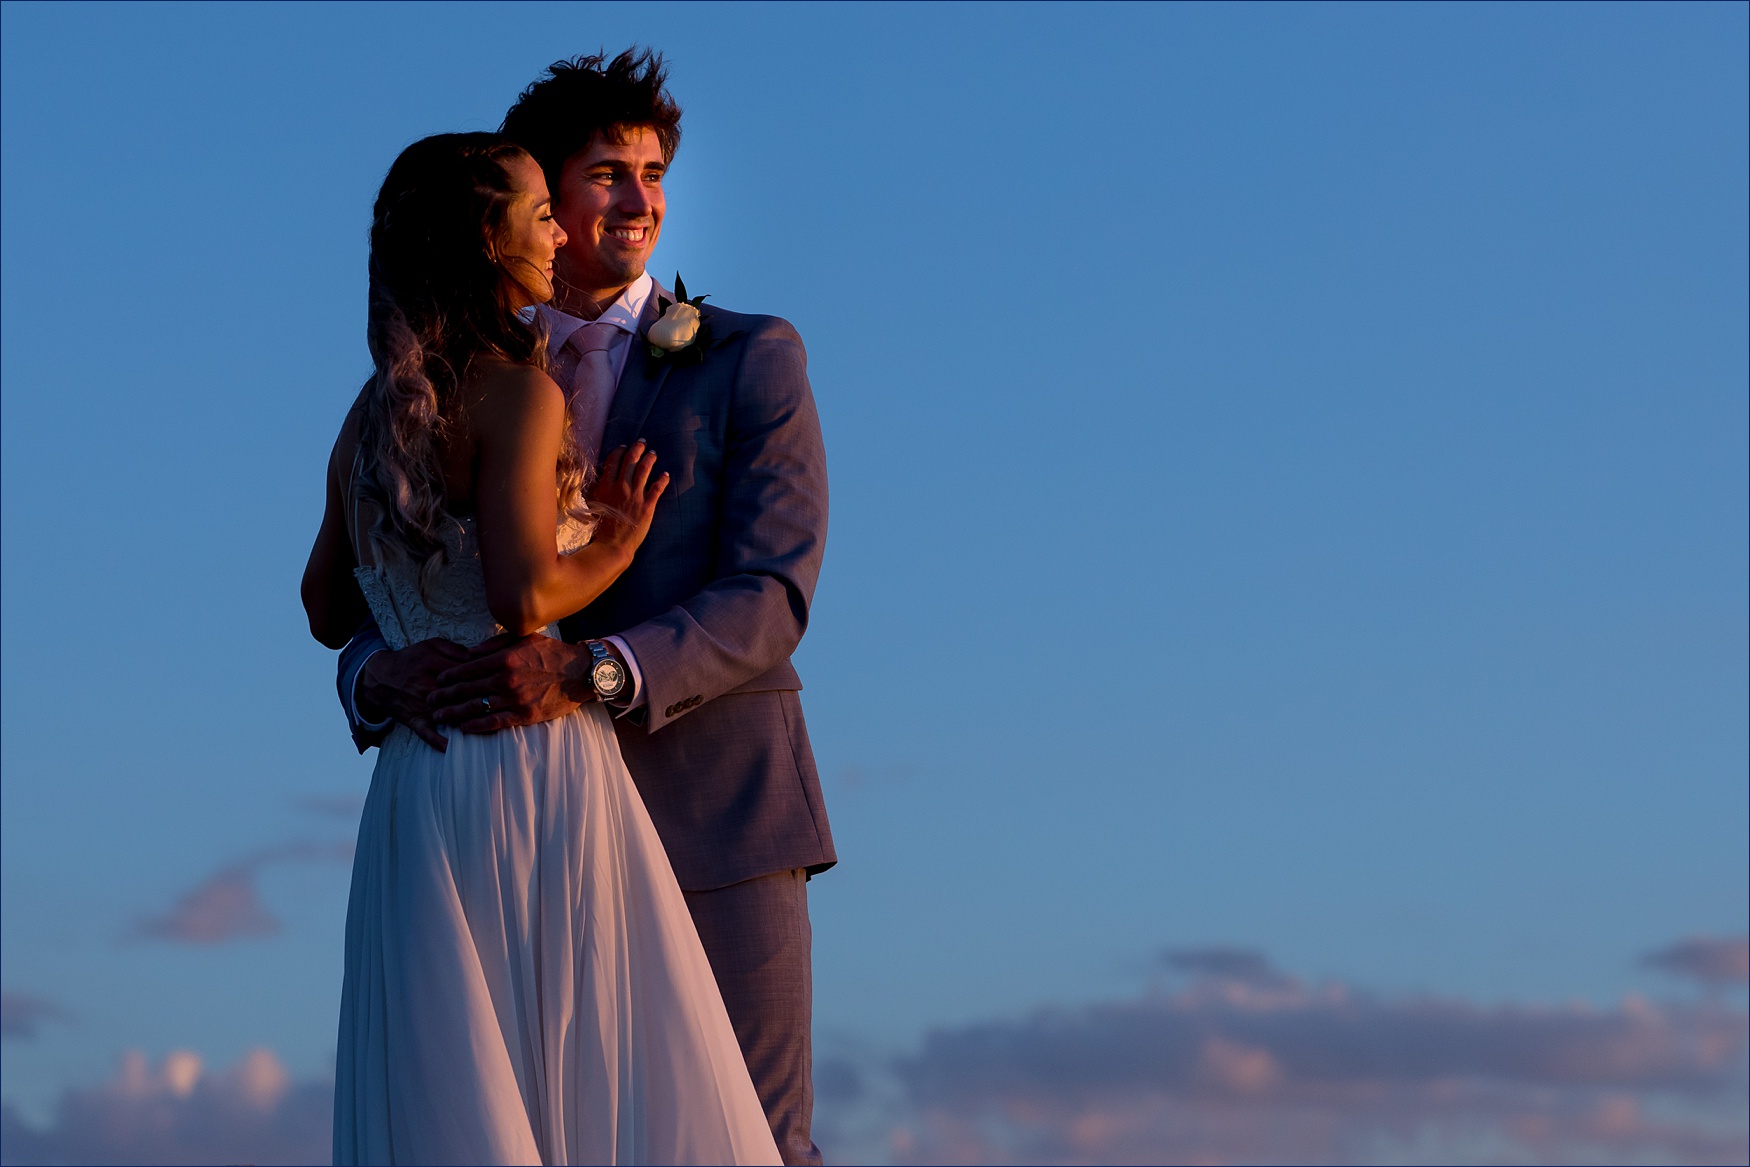 The bride and groom stand against a dark blue sky in Ogunquit Maine for their elopement